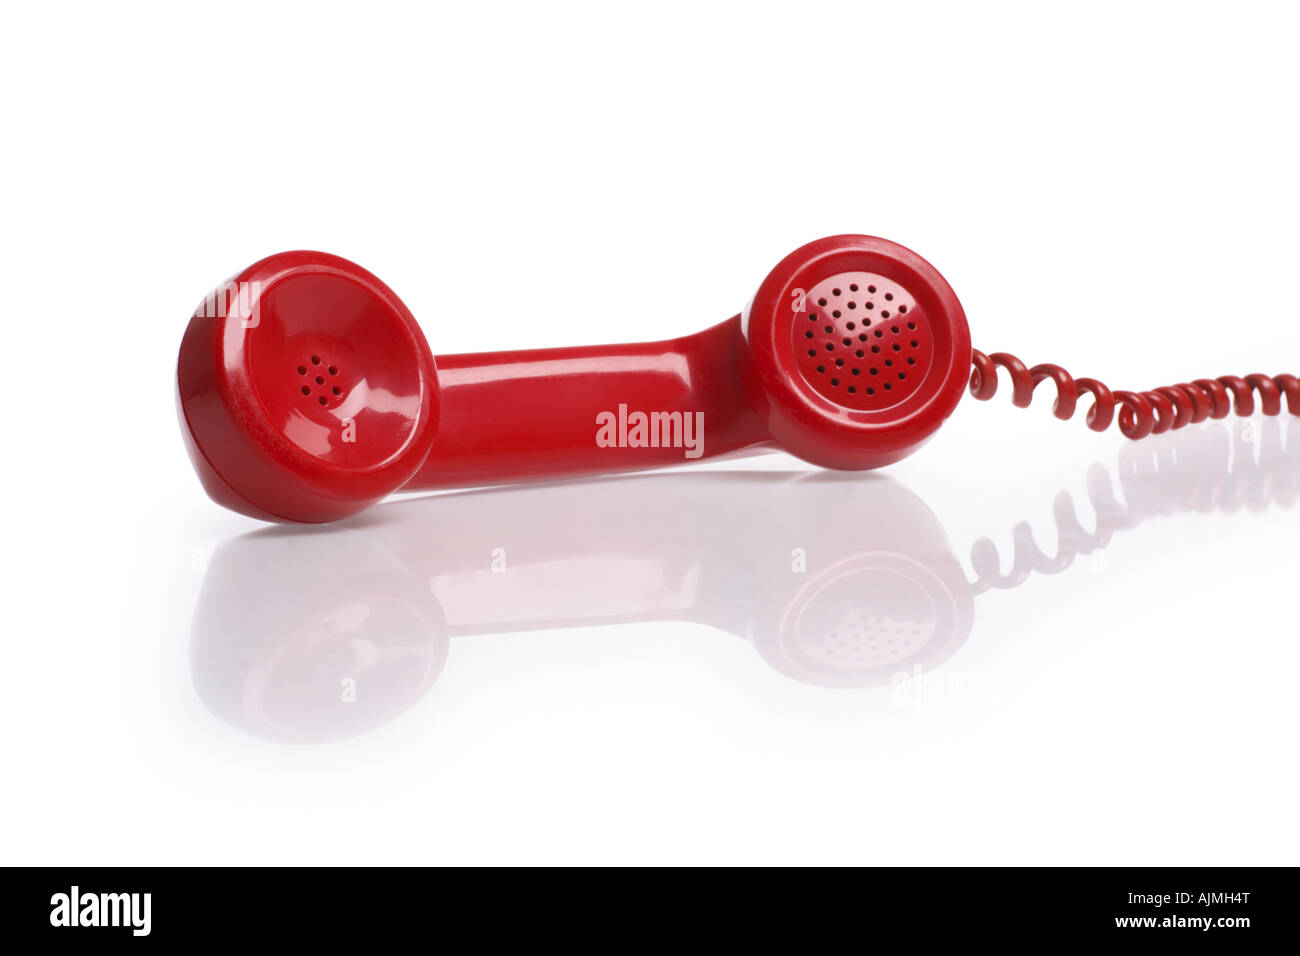 Red telephone receiver cut out on white background Stock Photo